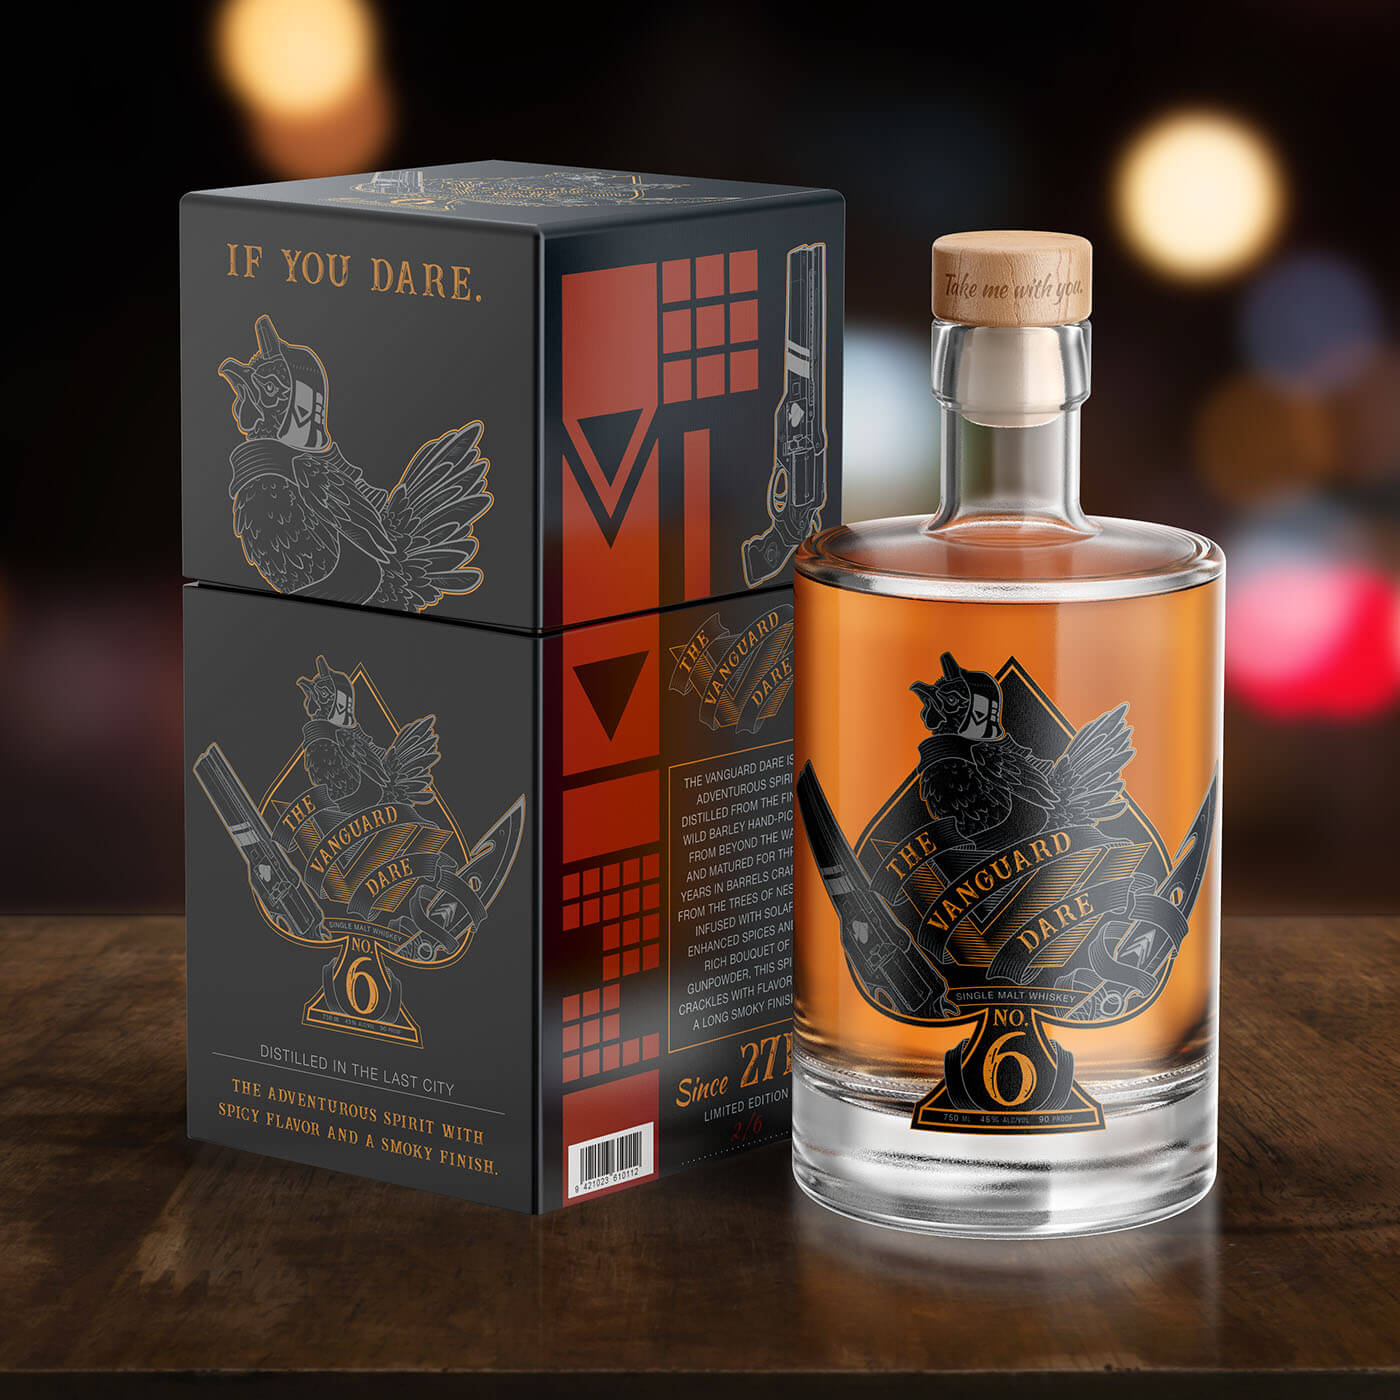 "The Vanguard Dare," a whiskey packaging design project inspired by Destiny 2.